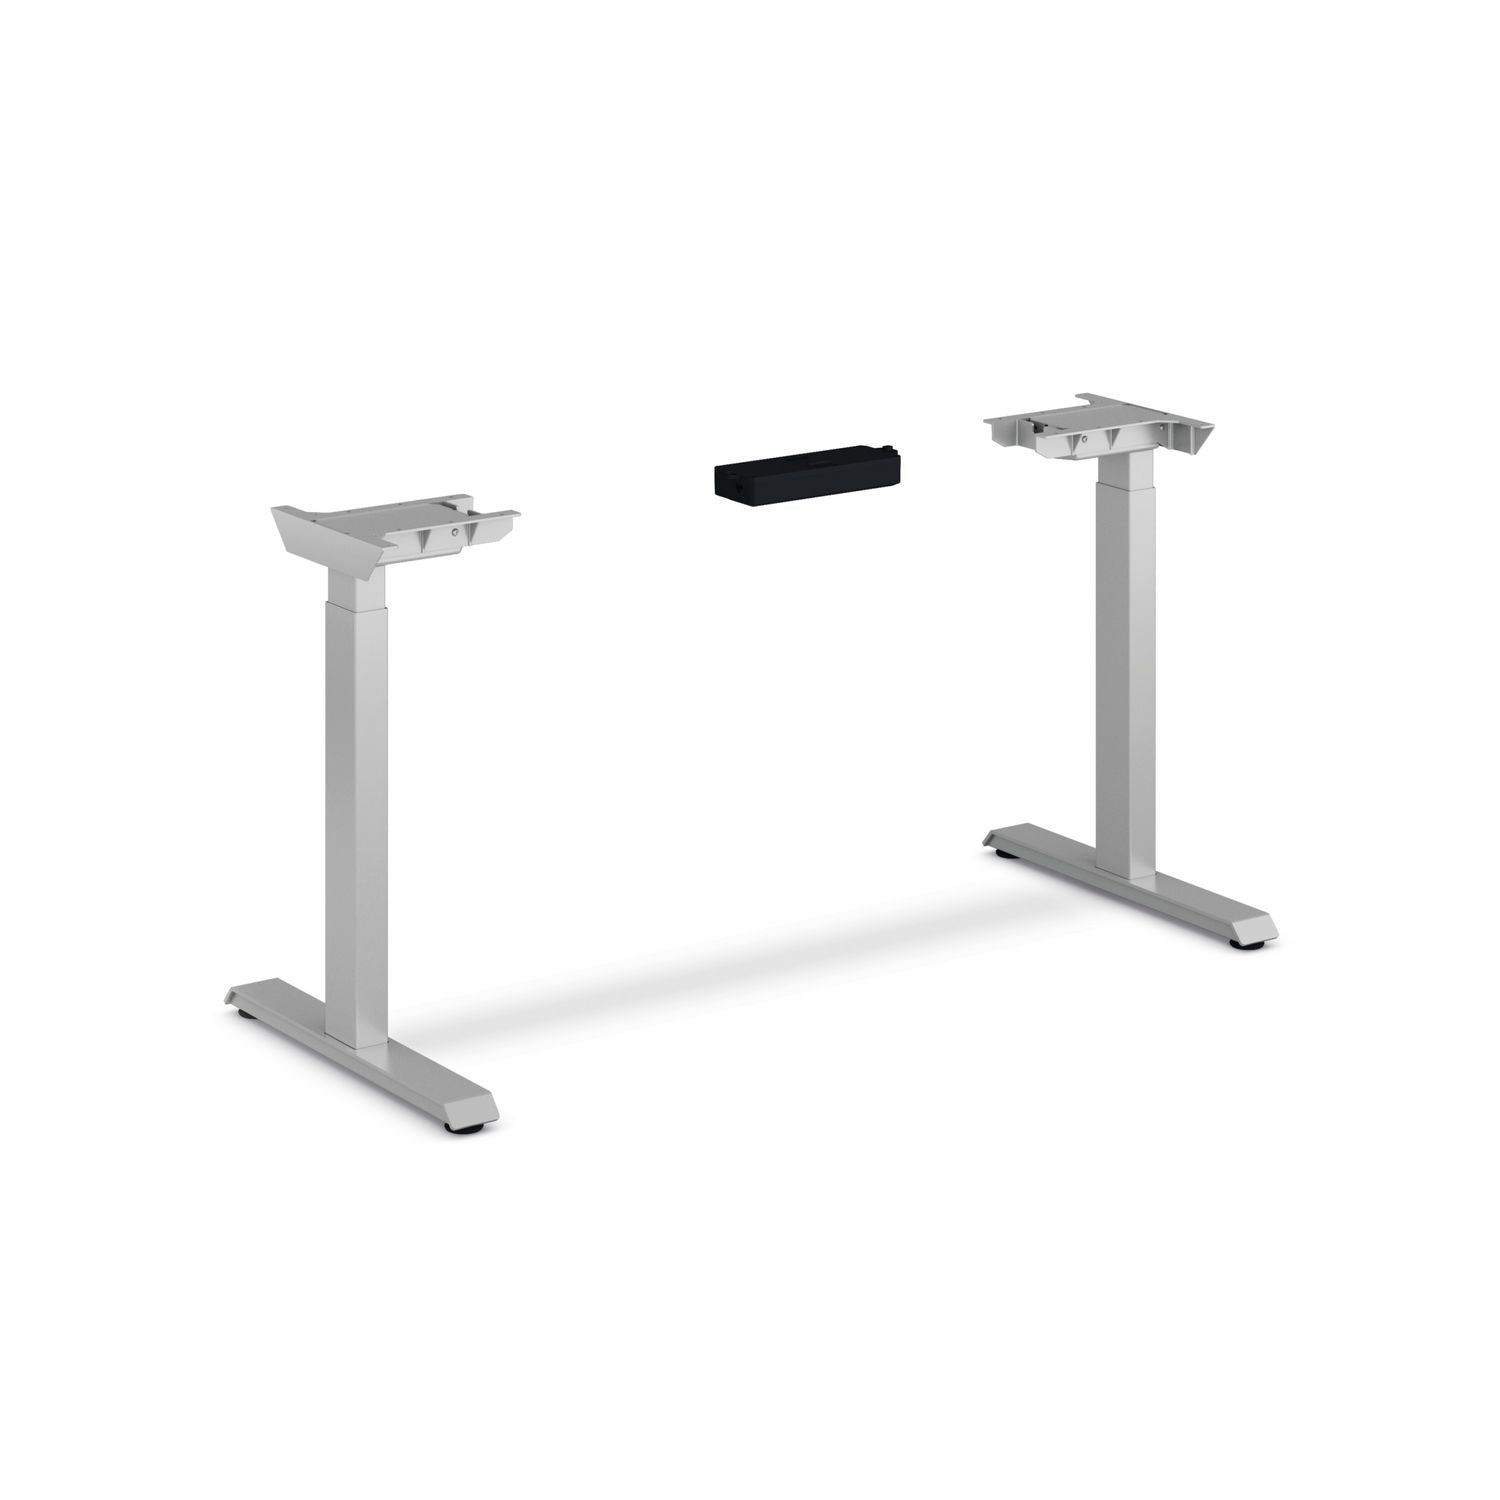 coordinate-height-adjustable-desk-bundle-2-stage-46-x-22-x-2775-to-47-silver-mesh\\silver-ships-in-7-10-business-days_honhat2smsv2246 - 3